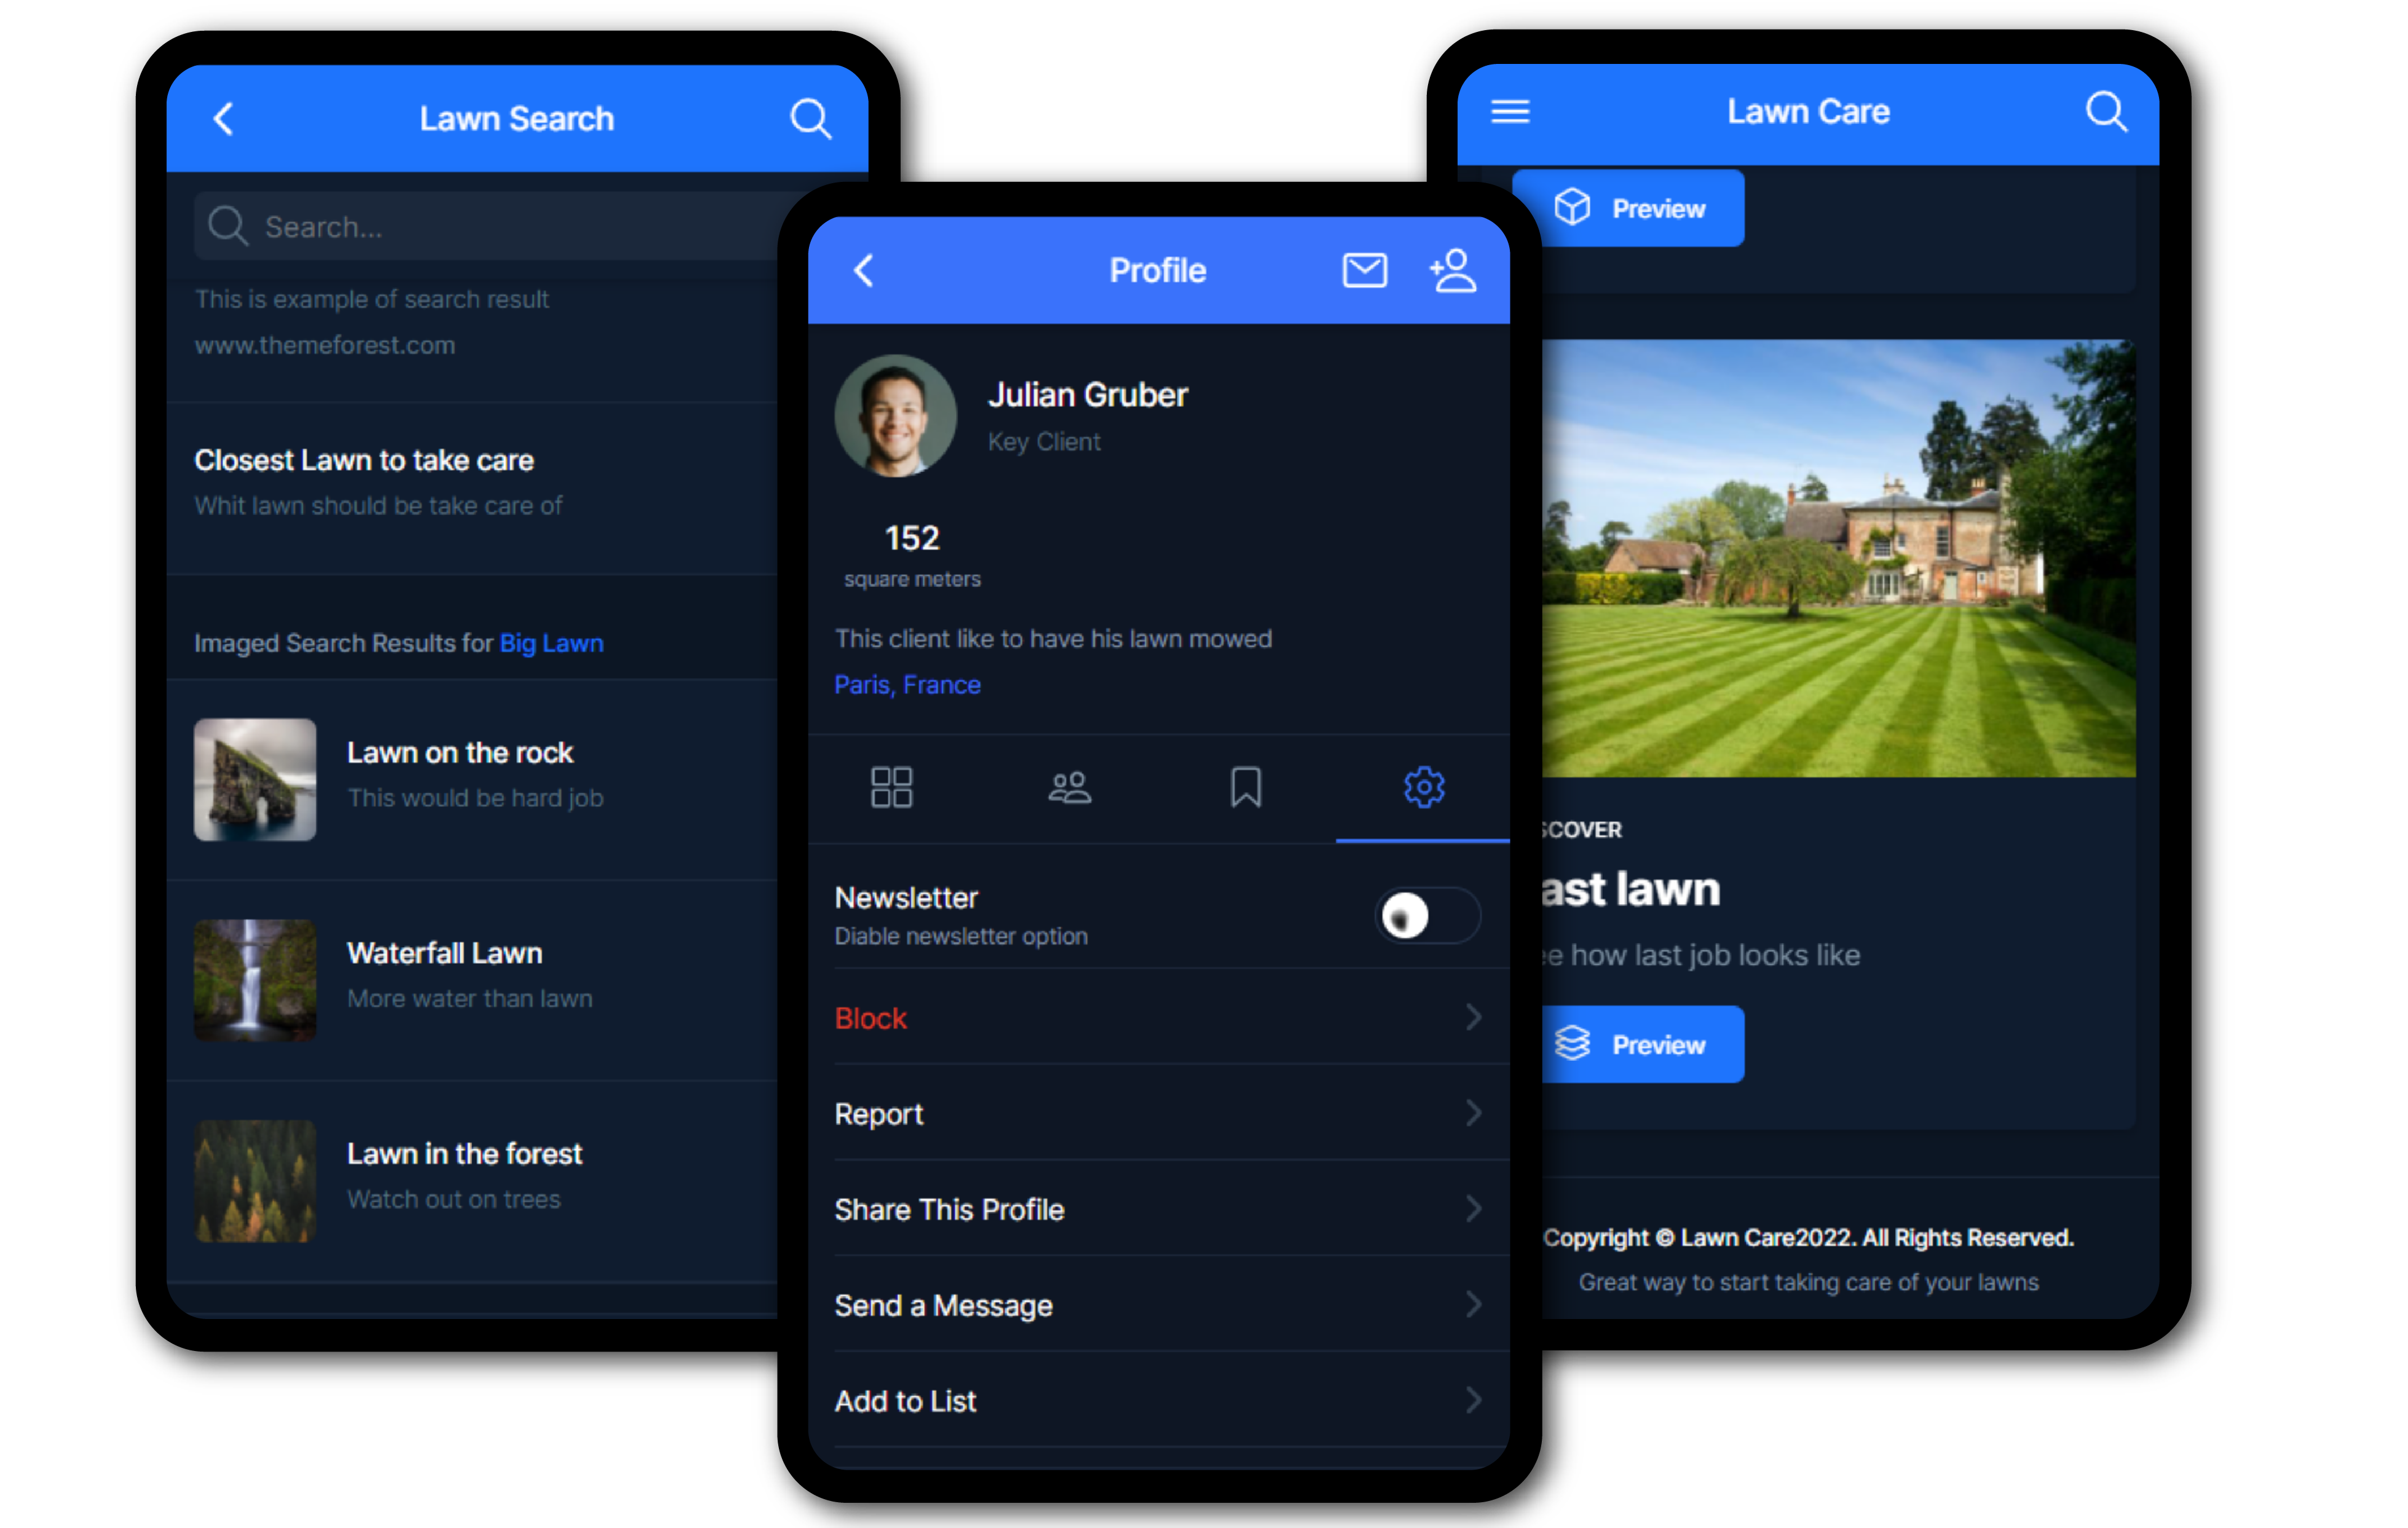 Three views from the mobile application: lawn search, user profile and discover tab